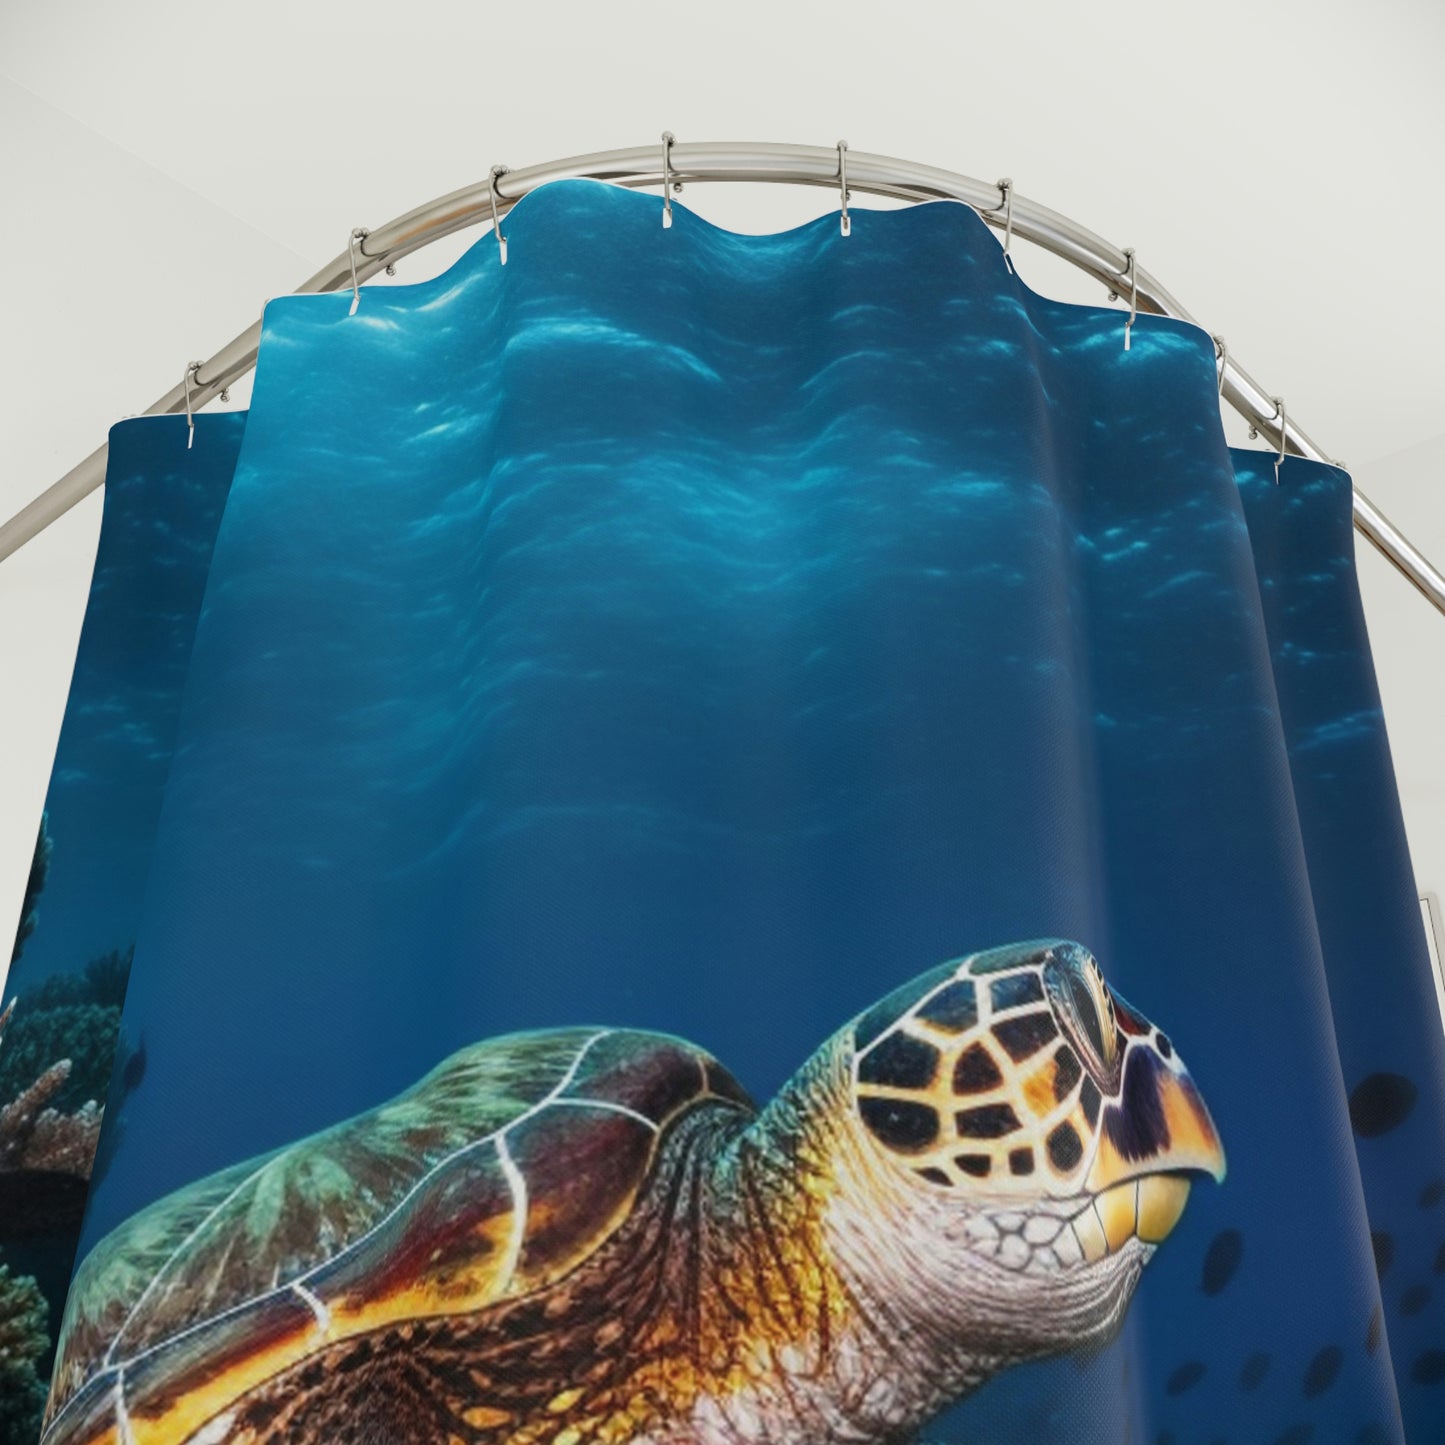 Polyester Shower Curtain see turtle 1